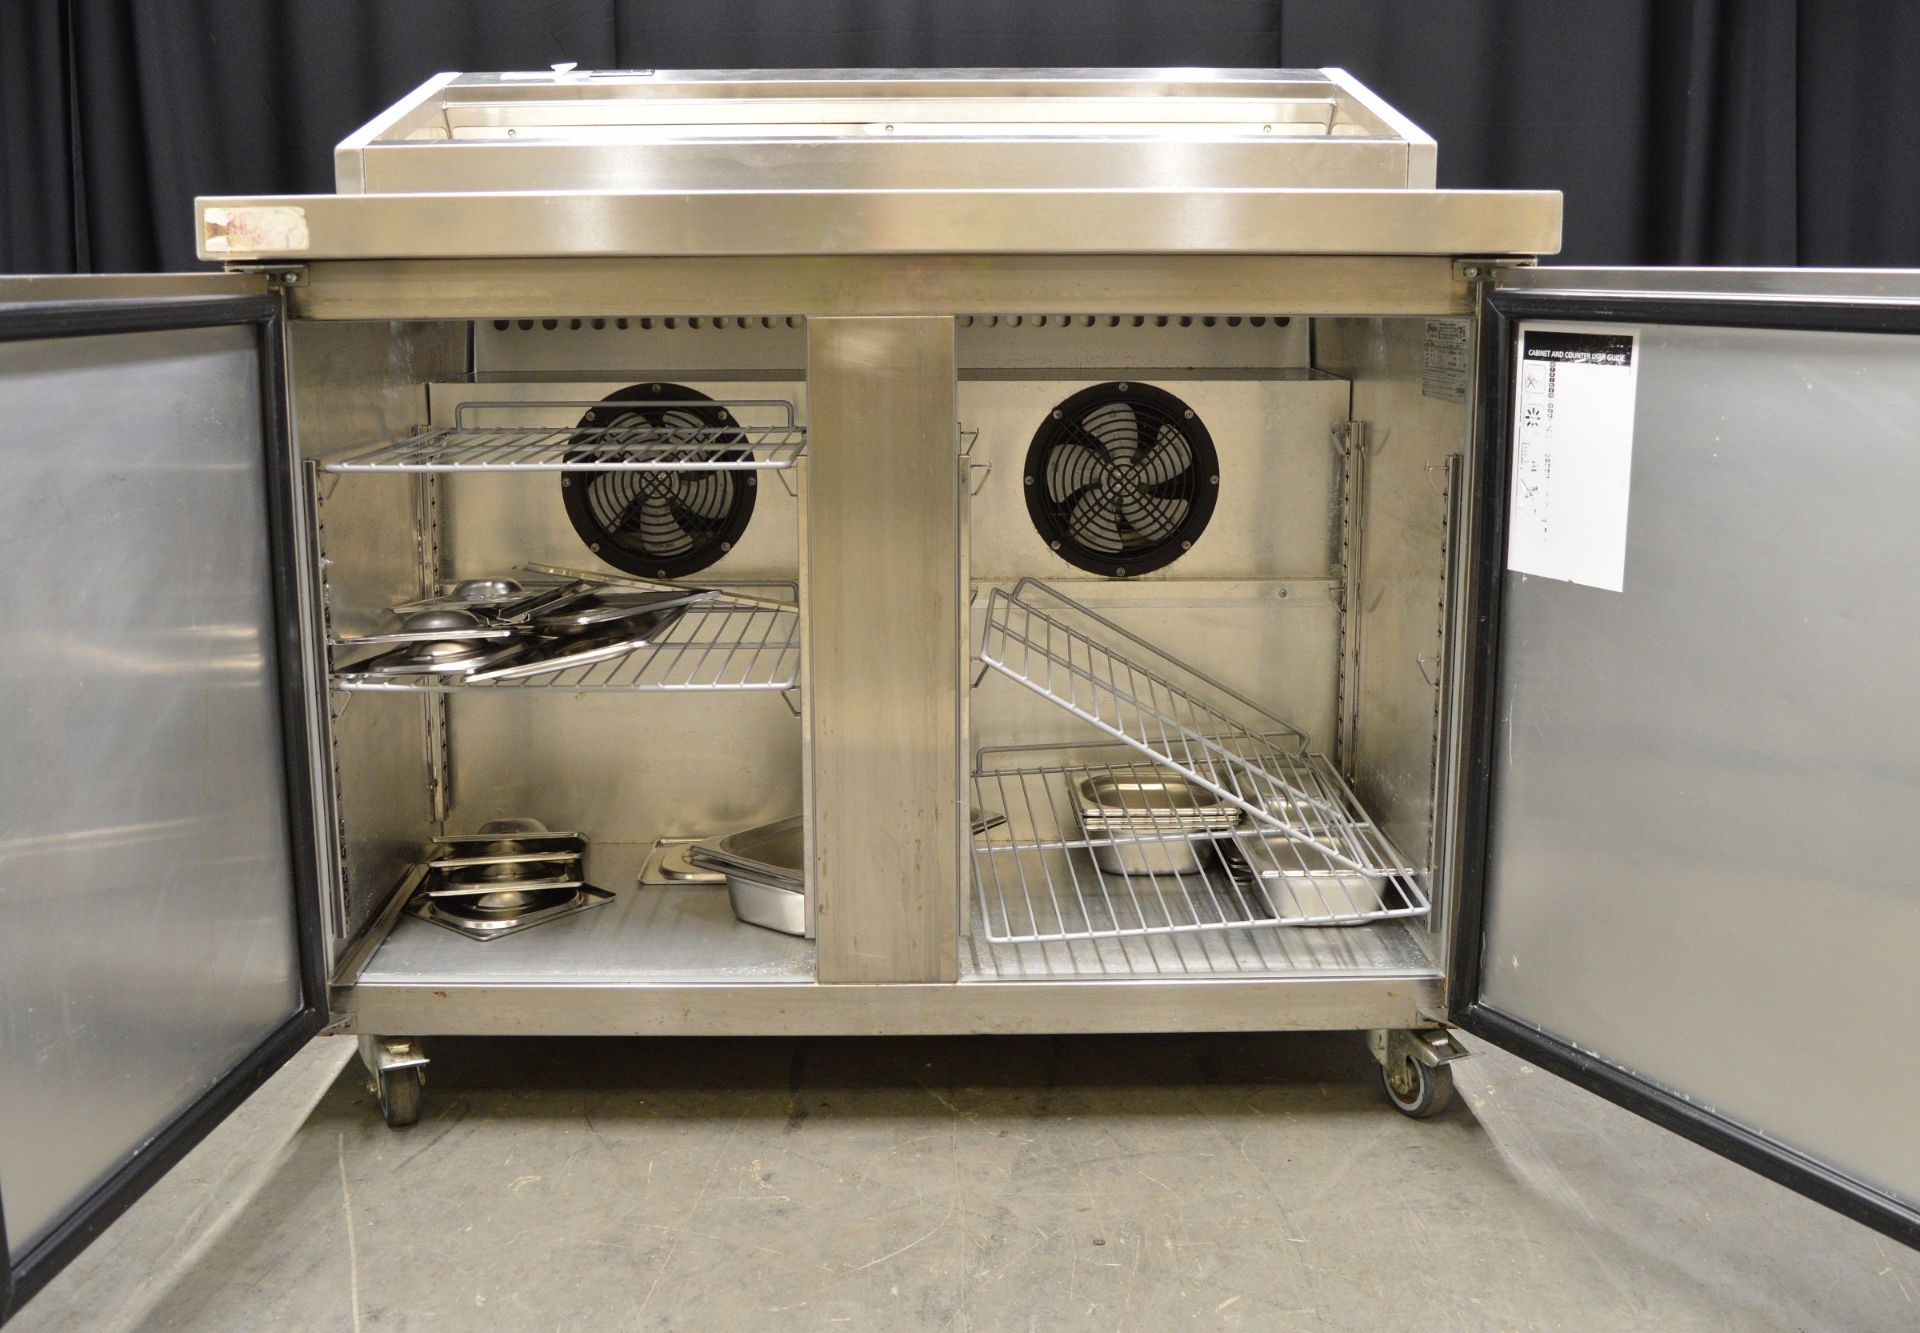 Foster FPS2HR 2 Door Refrigerated Preparation Counter - Image 4 of 8